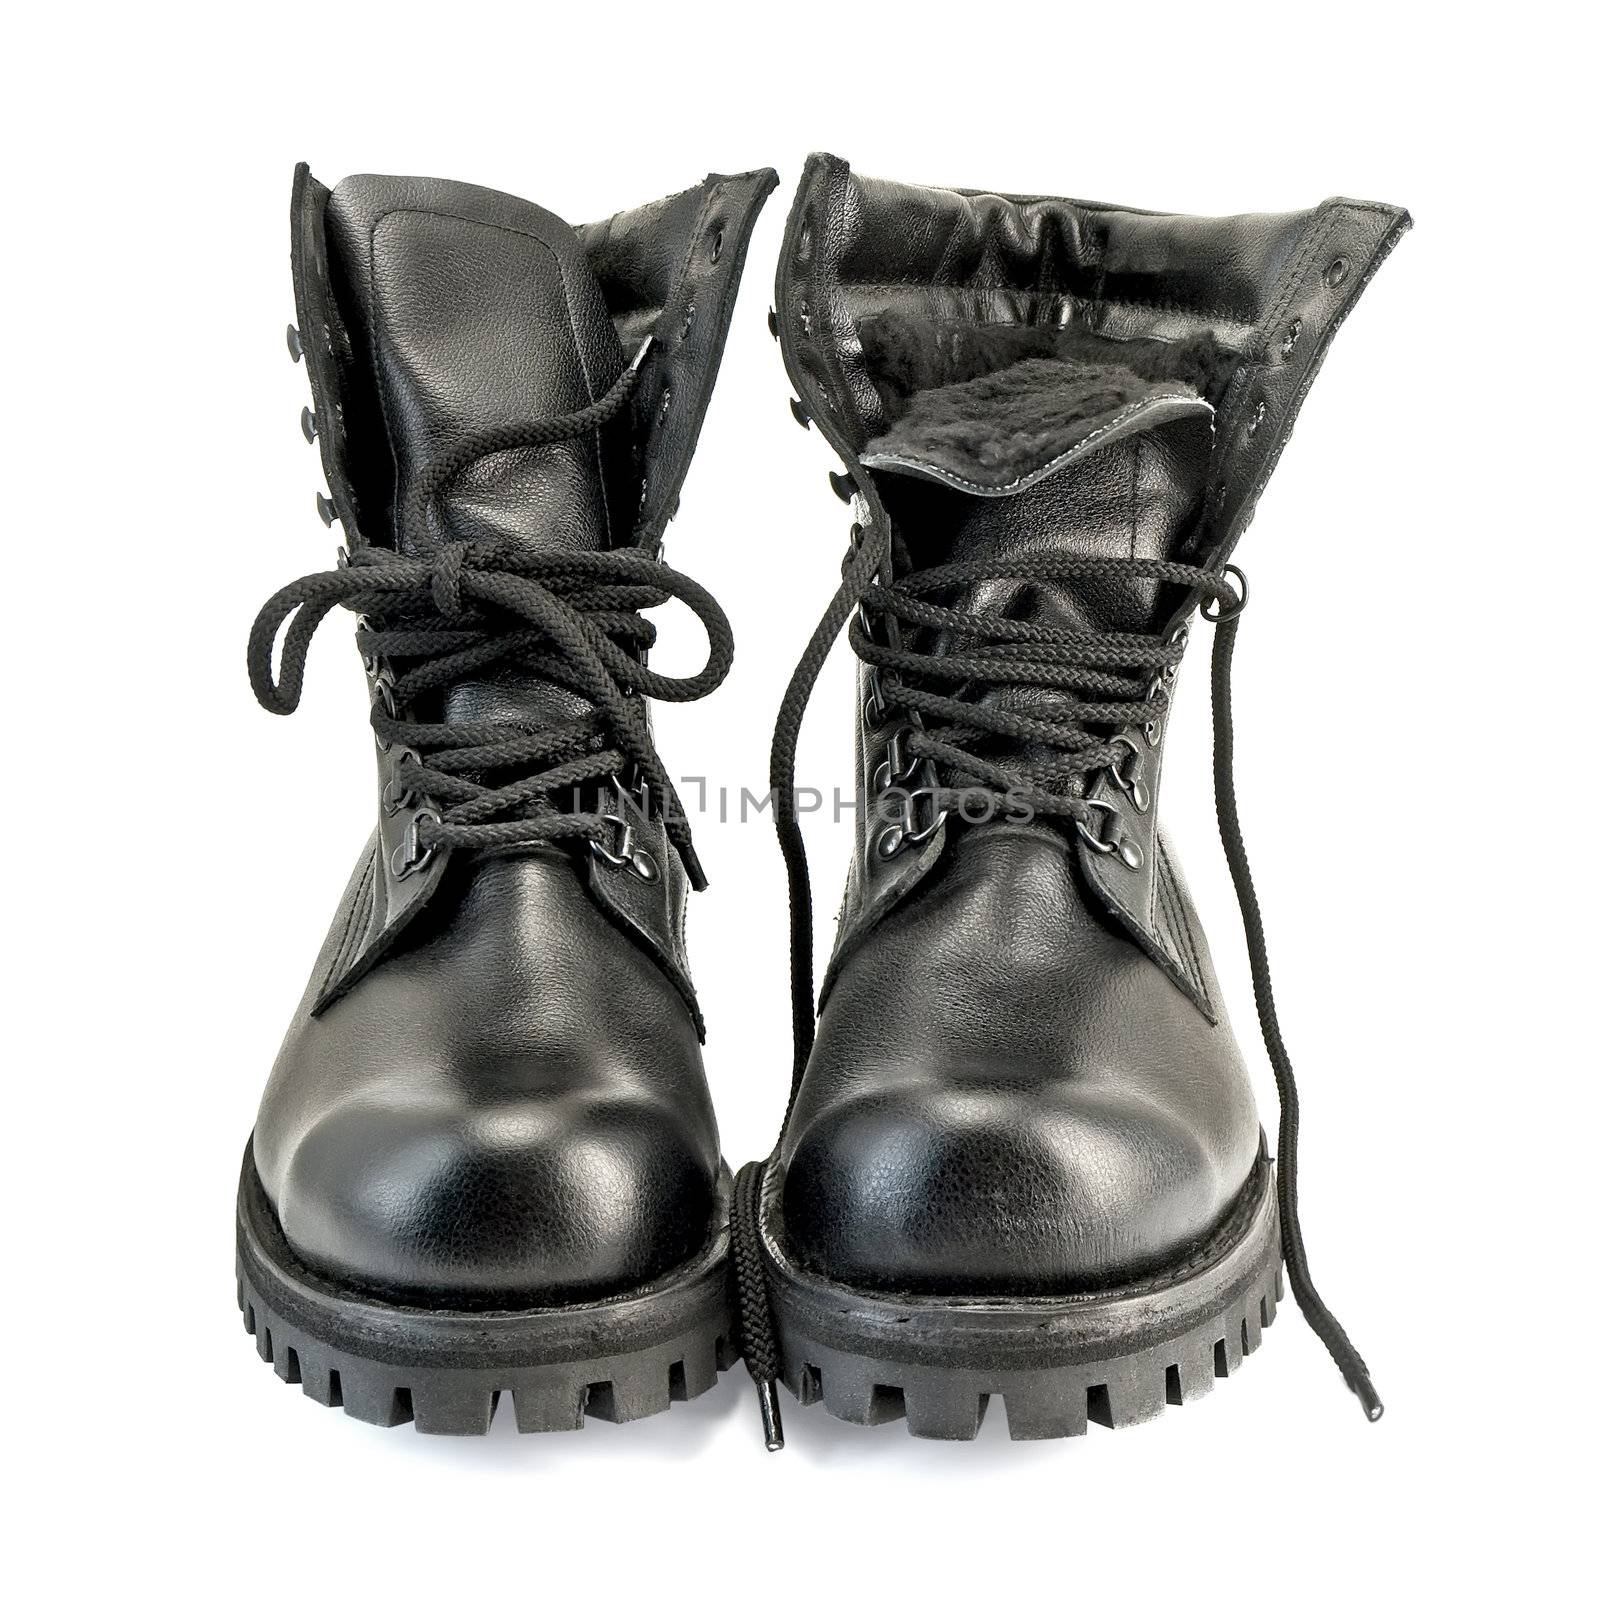 A pair of high black leather boots isolated on white background